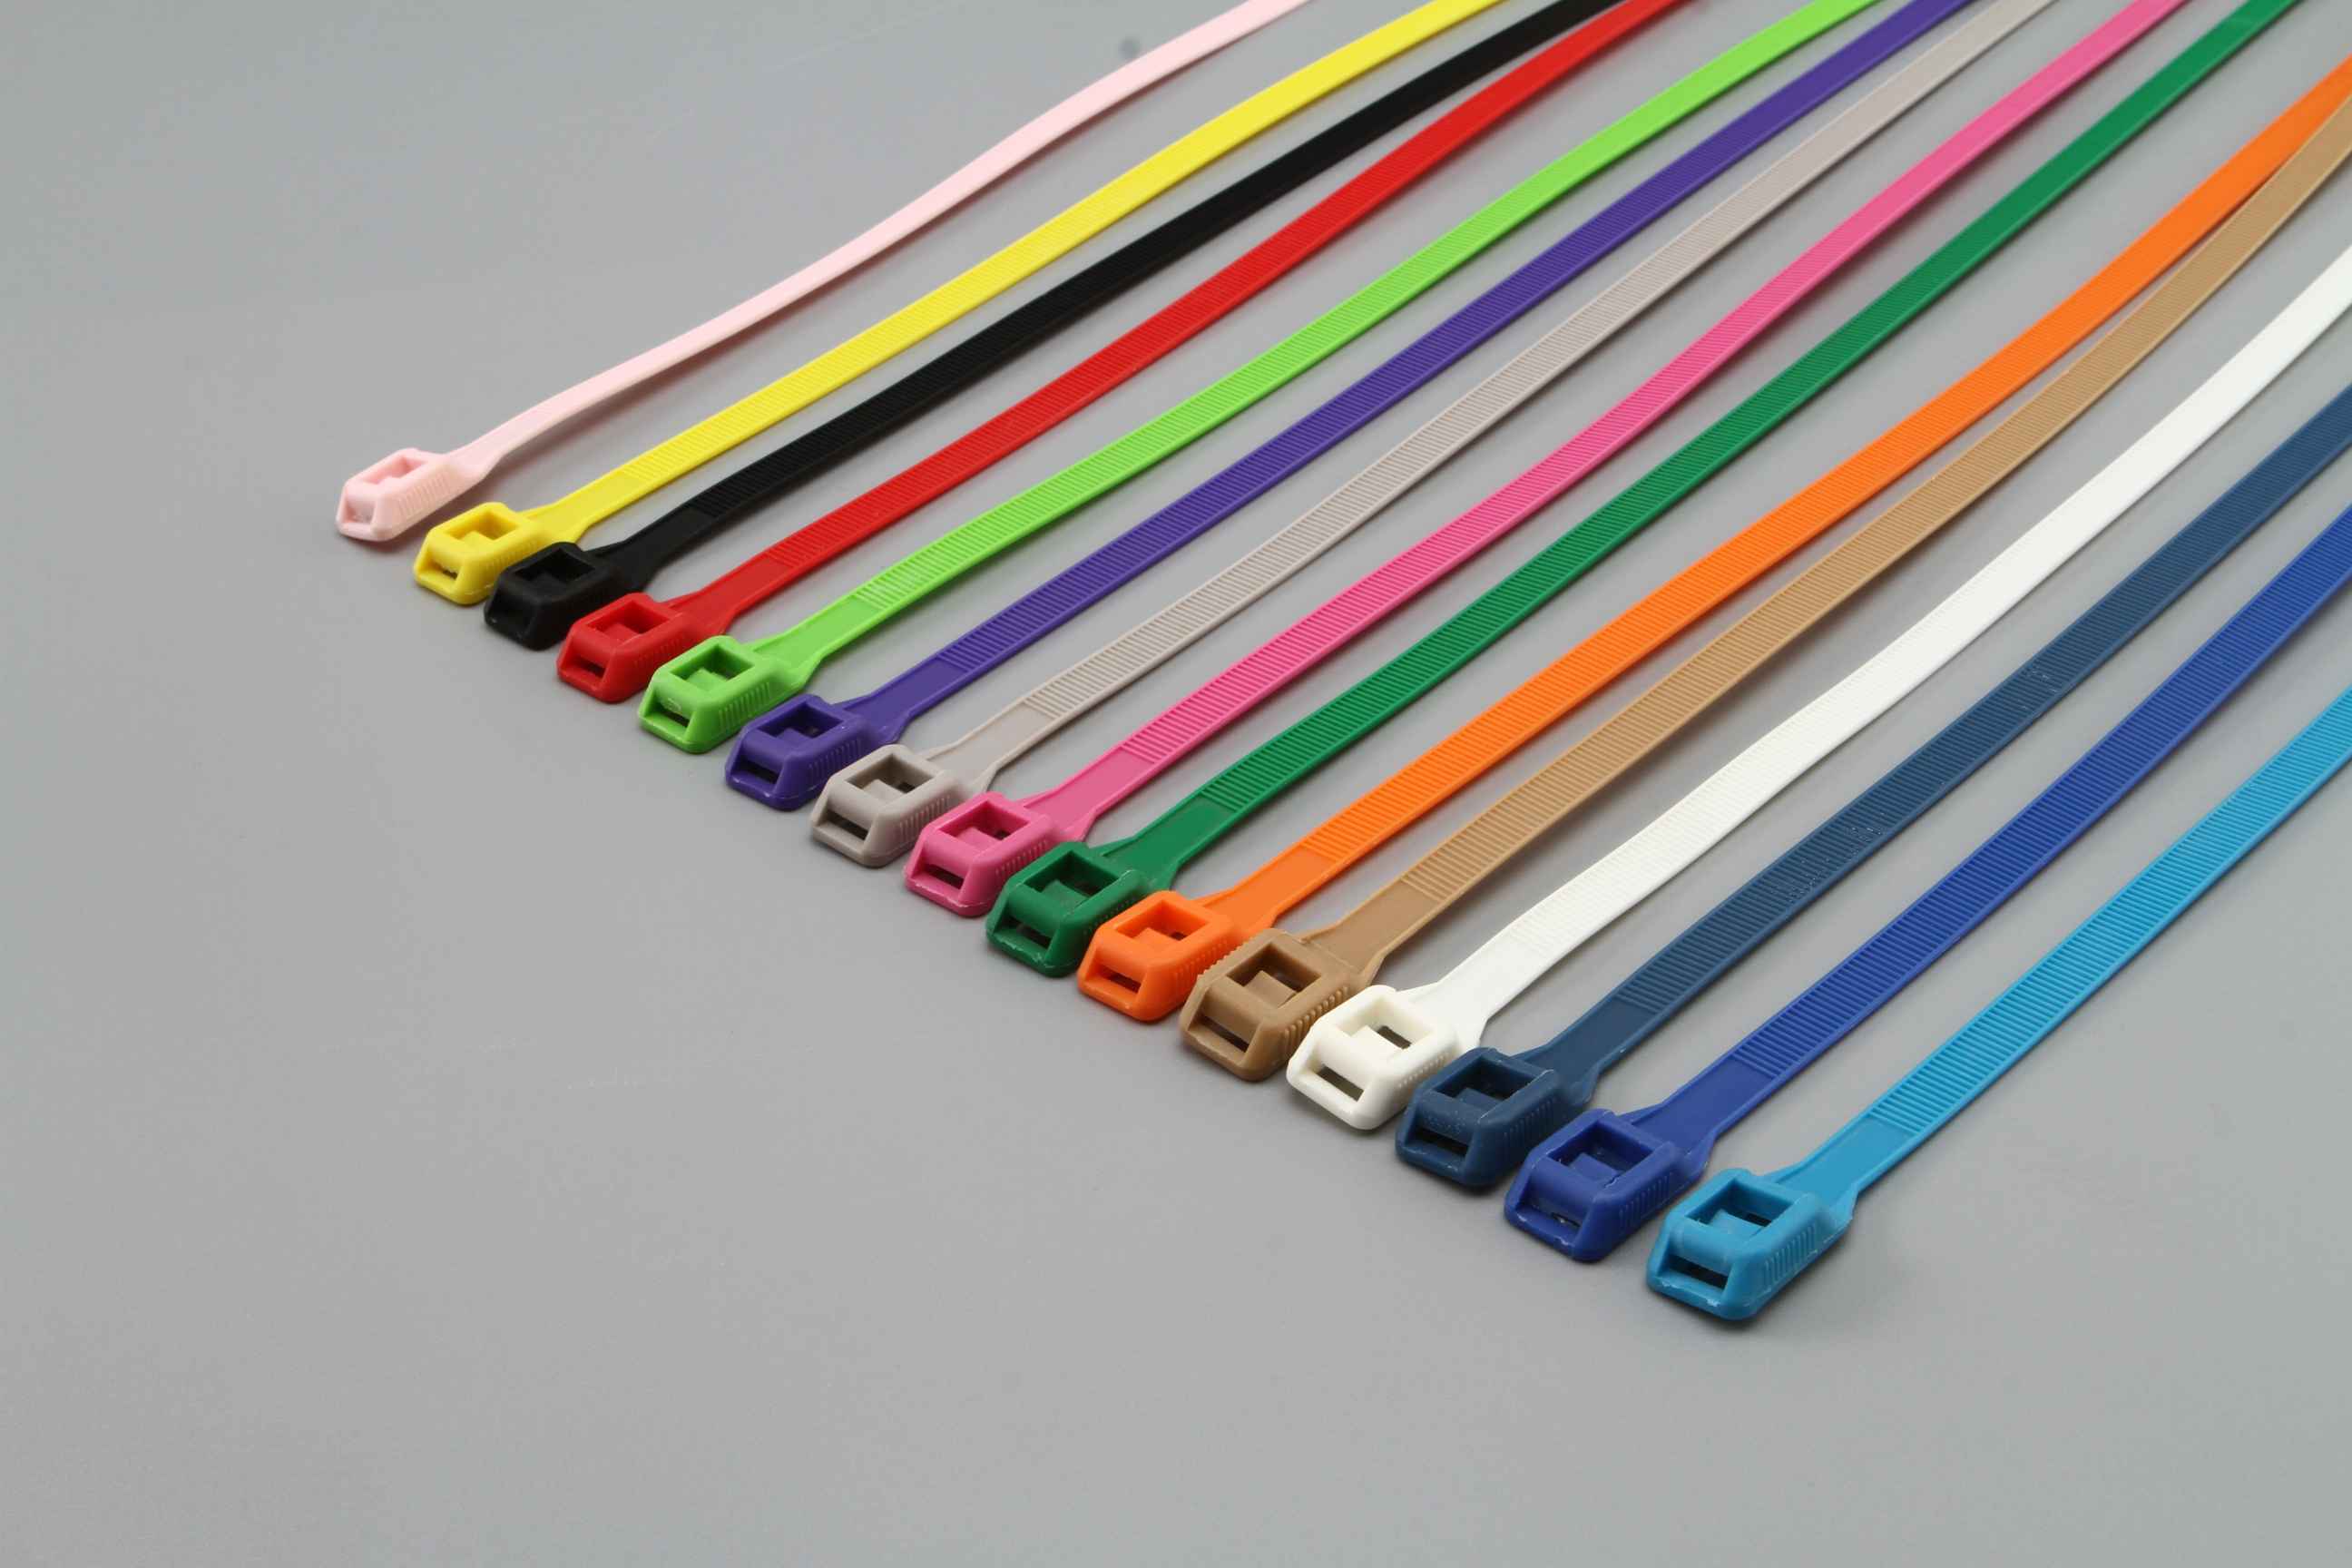 Fixed head cable tie - 2